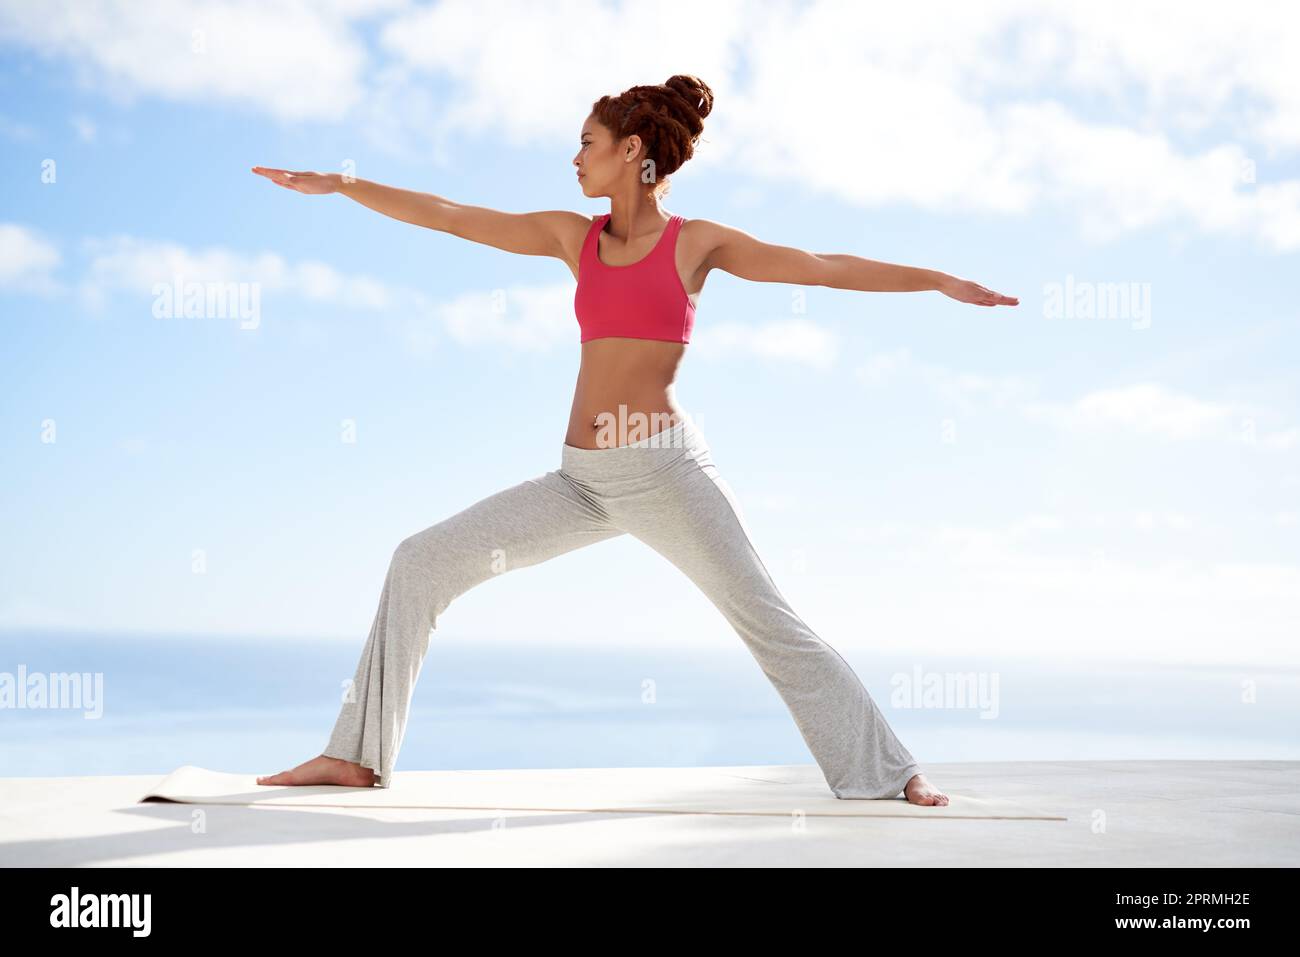 Staying balanced physically and mentally. a young woman practicing yoga outside on a sunny day. Stock Photo